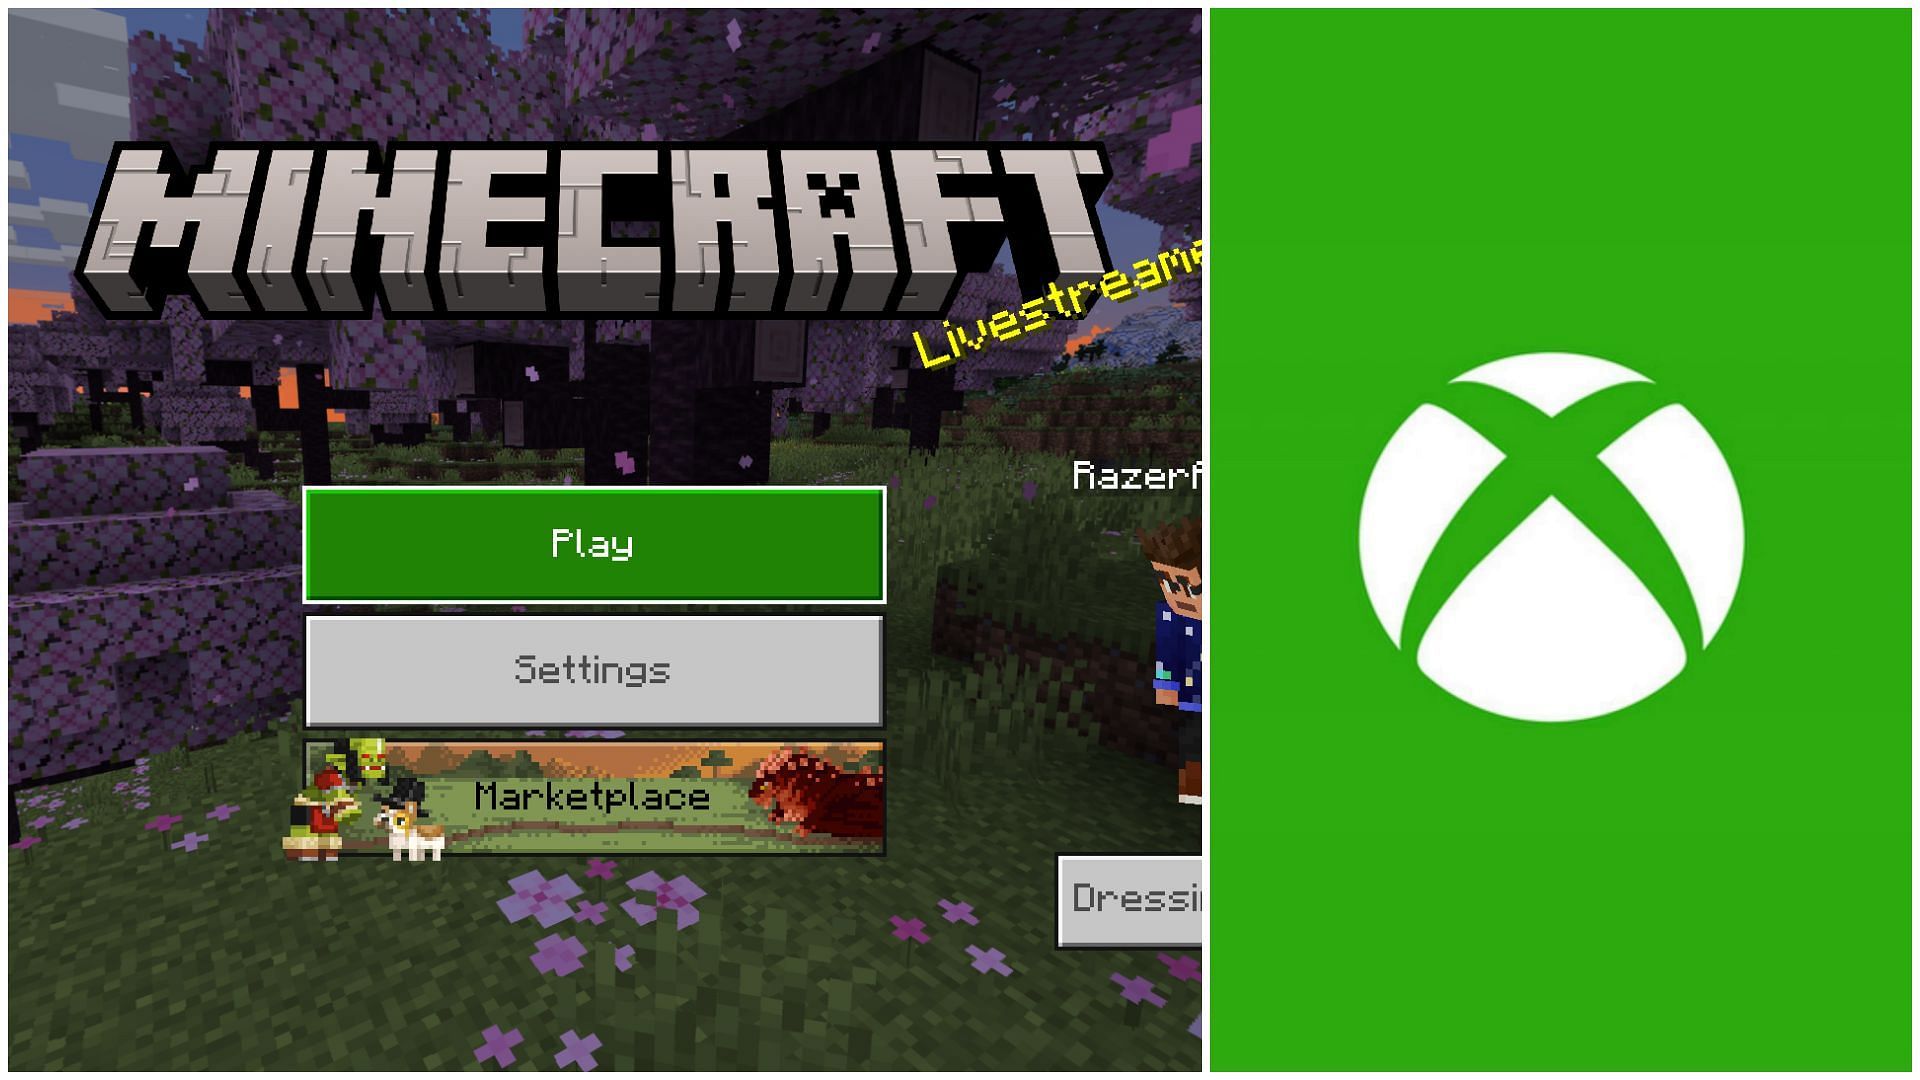 Minecraft Bedrock Edition now supports 4k resolution on Xbox consoles (Image via Mojang)